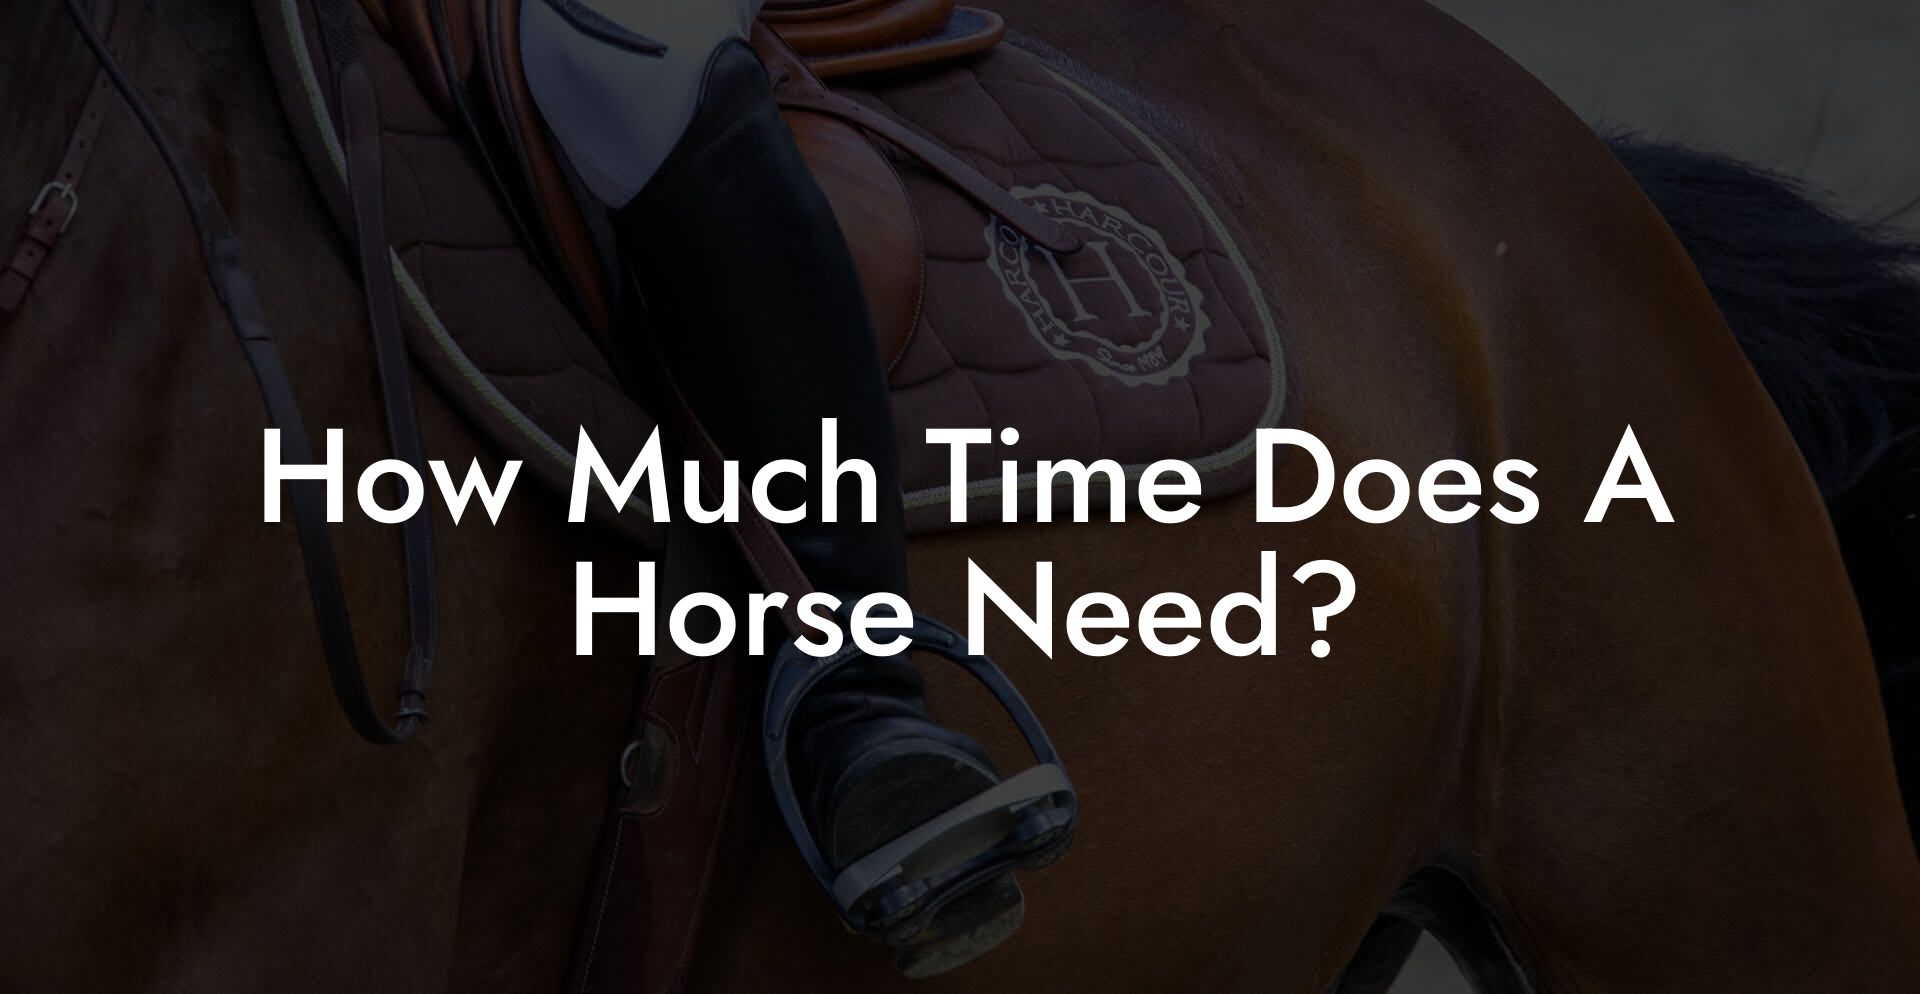 How Much Time Does A Horse Need?